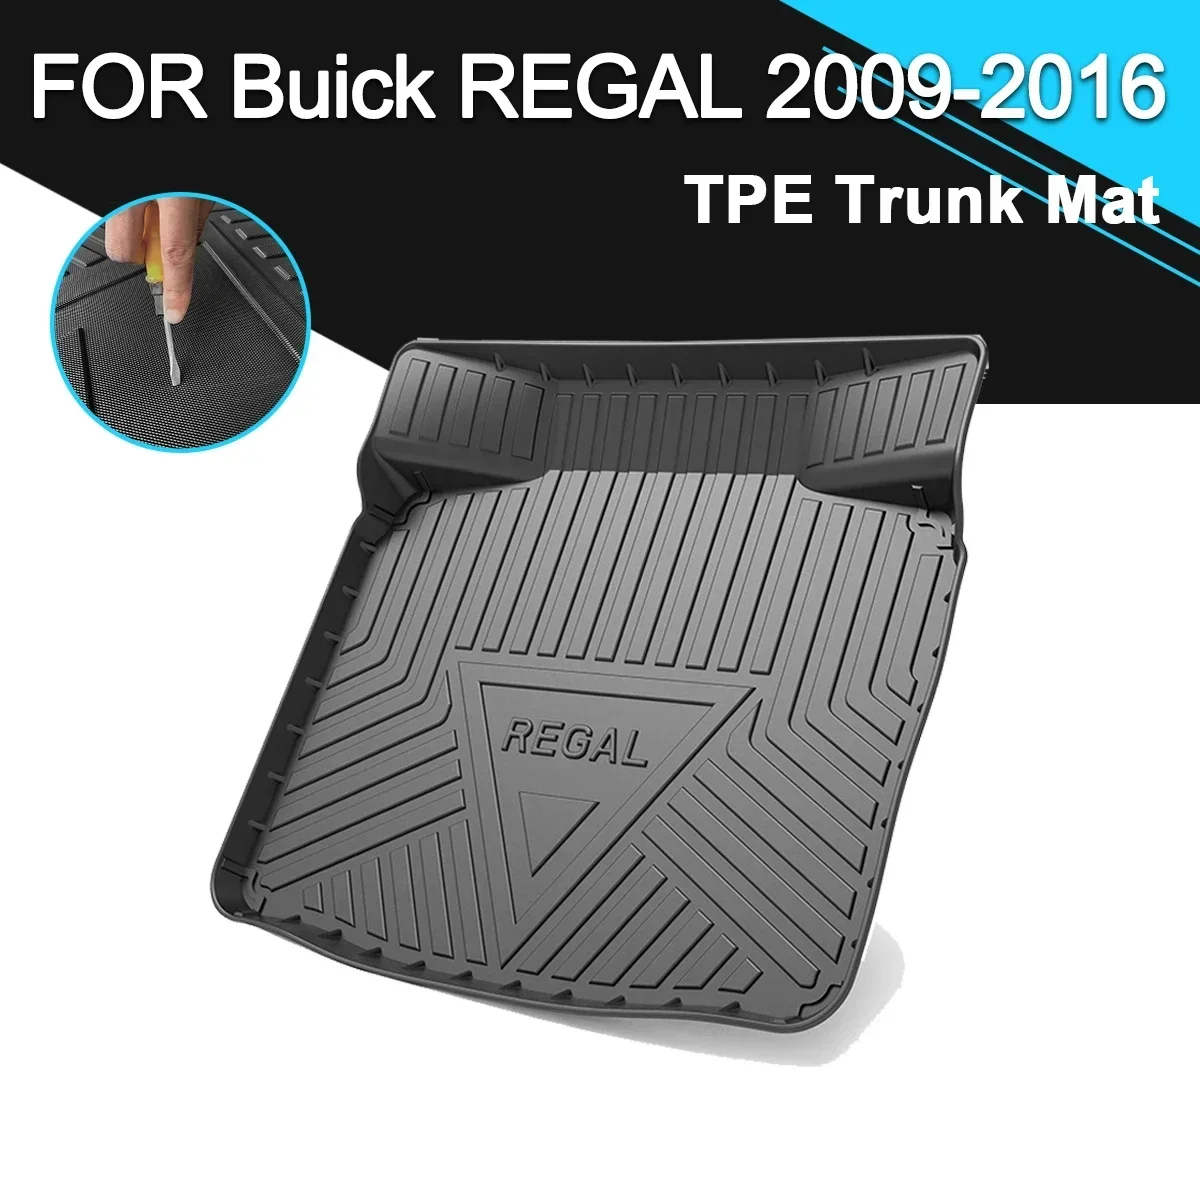 

Car Rear Trunk Cover Mat Rubber TPE Waterproof Non-Slip Cargo Liner Accessories For Buick REGAL 2009-2016